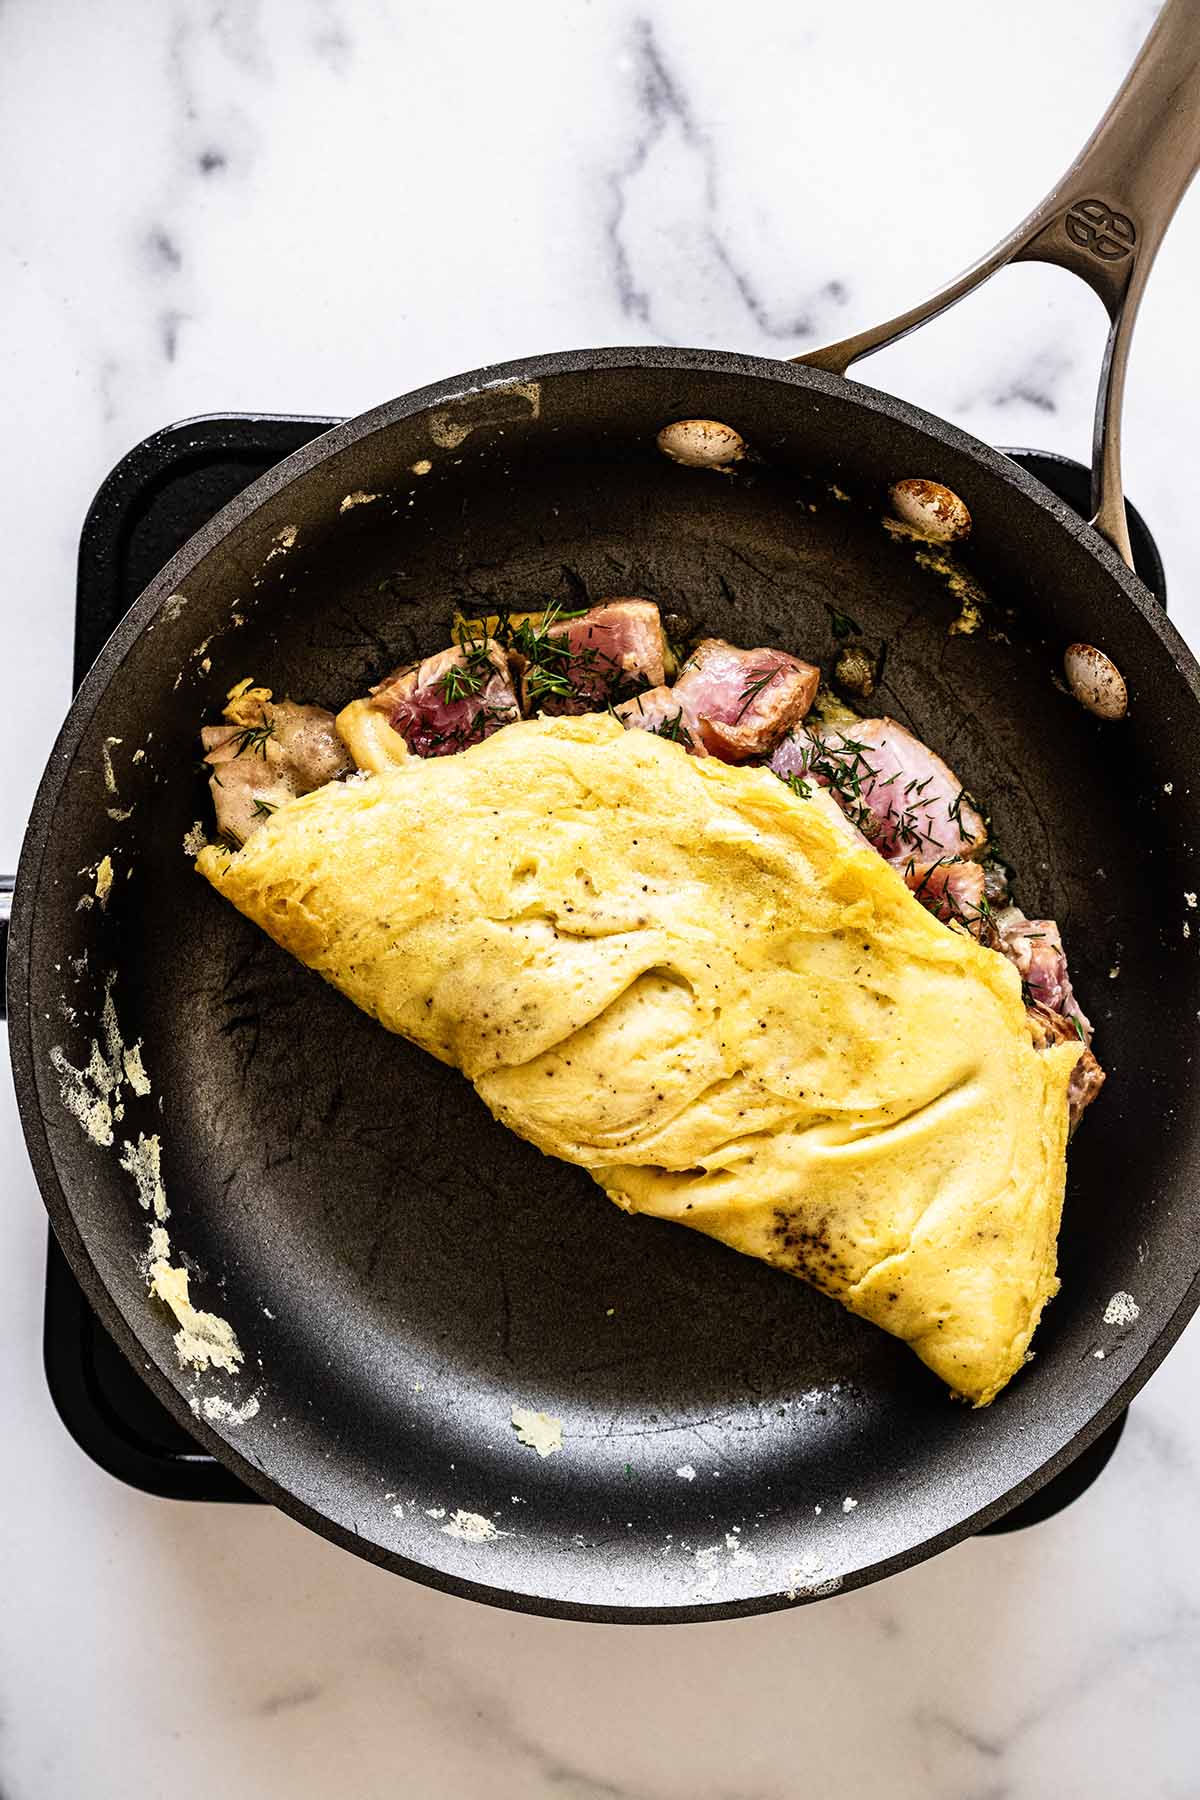 Overhead view of cooked omelette in a skillet